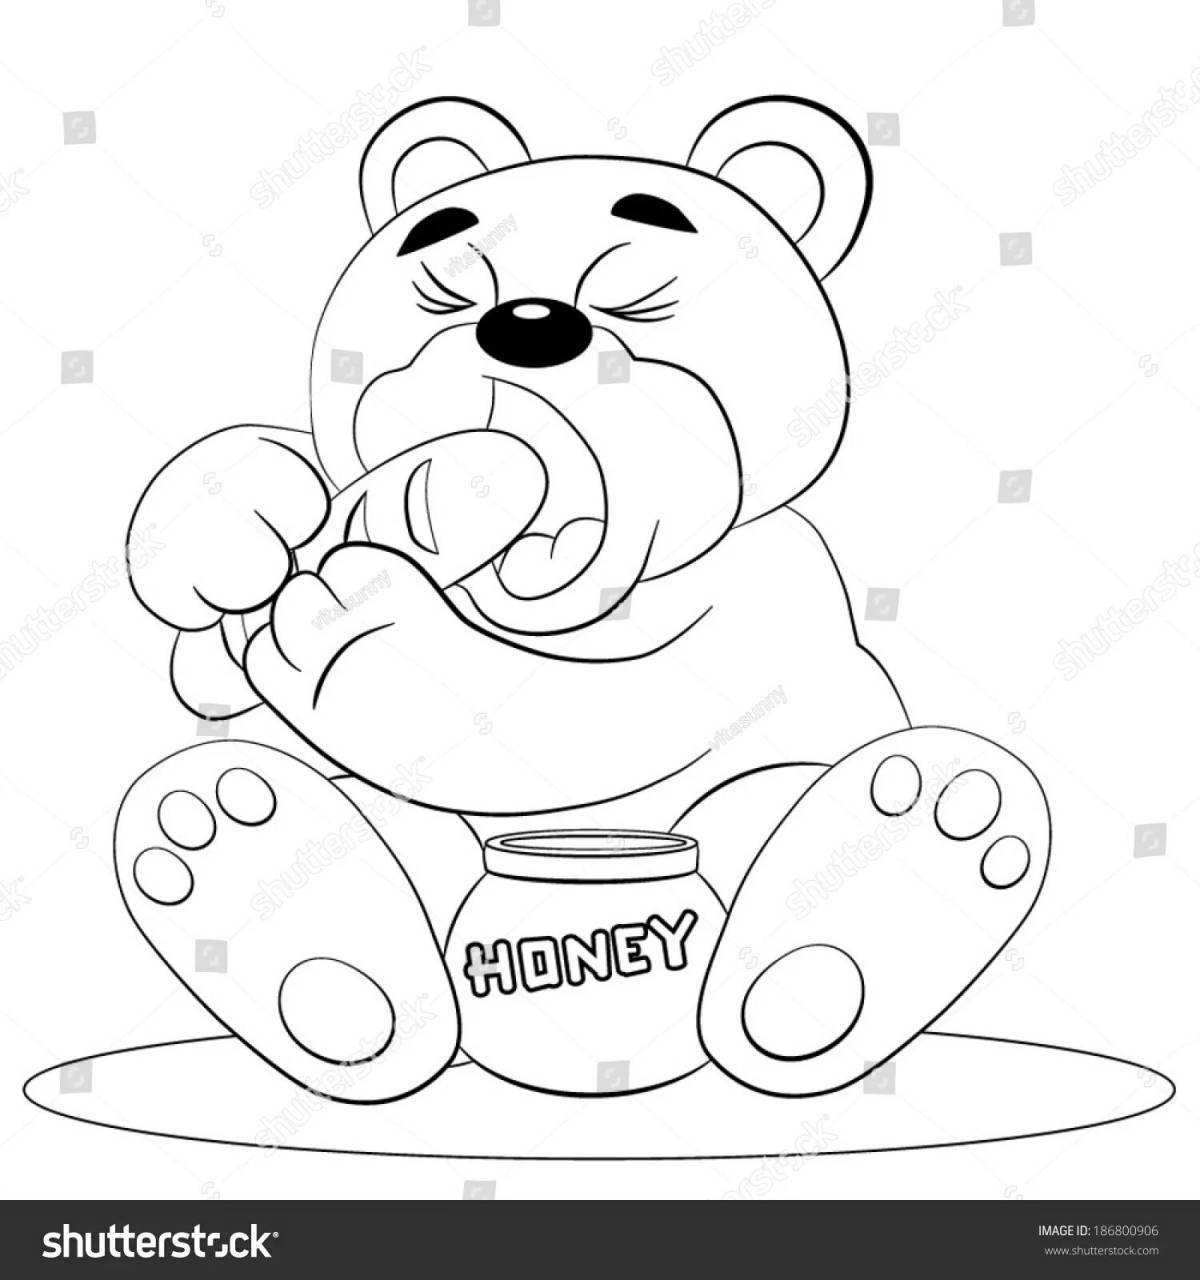 Fancy bear with honey coloring page